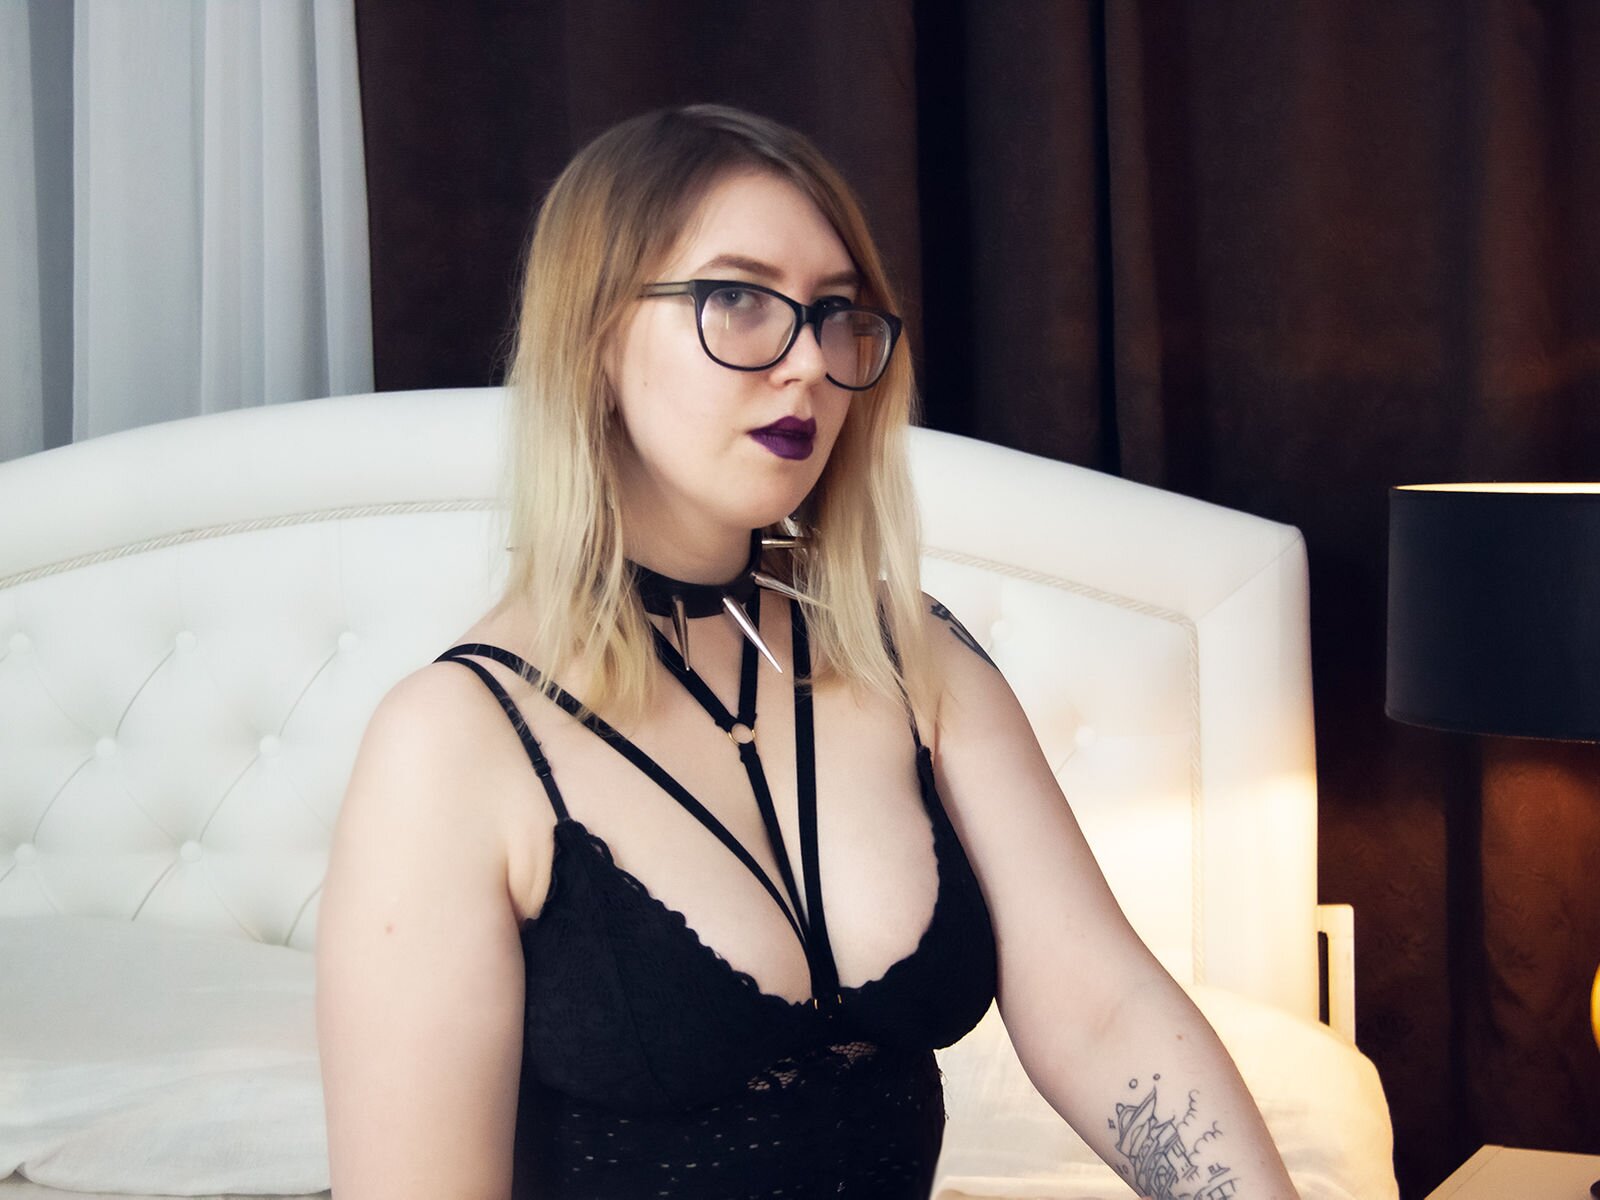 Free Live Sex Chat With LindaMonroe